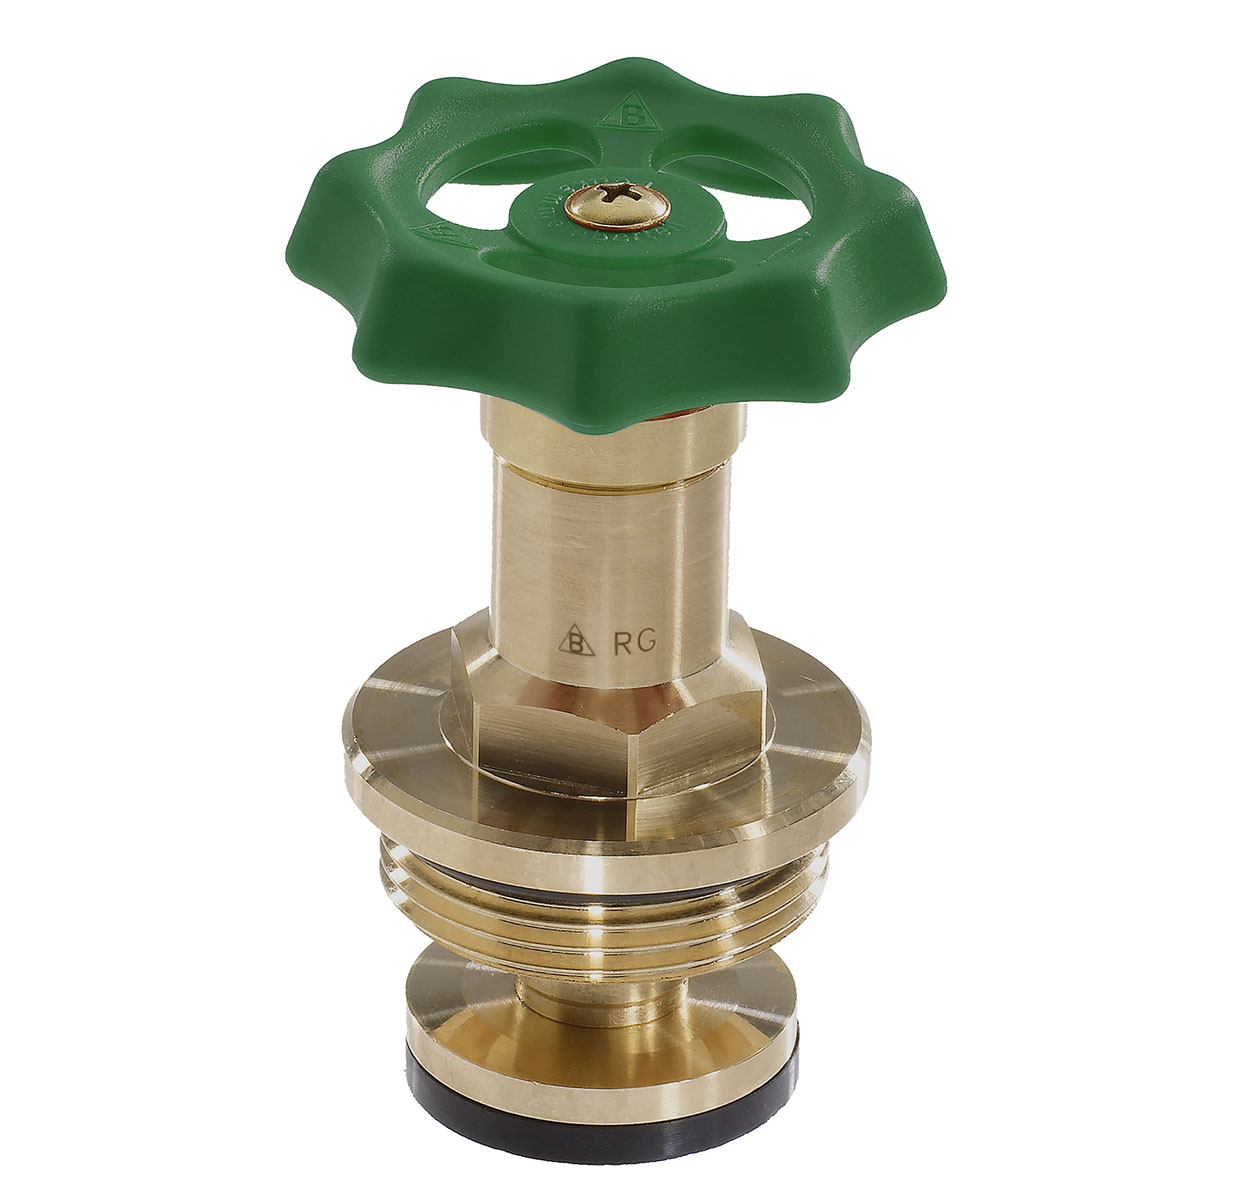 1274250 - Cuphin Upper-part with grease chamber SOFT-drive-system, for free-flow valves, non-rising spindle